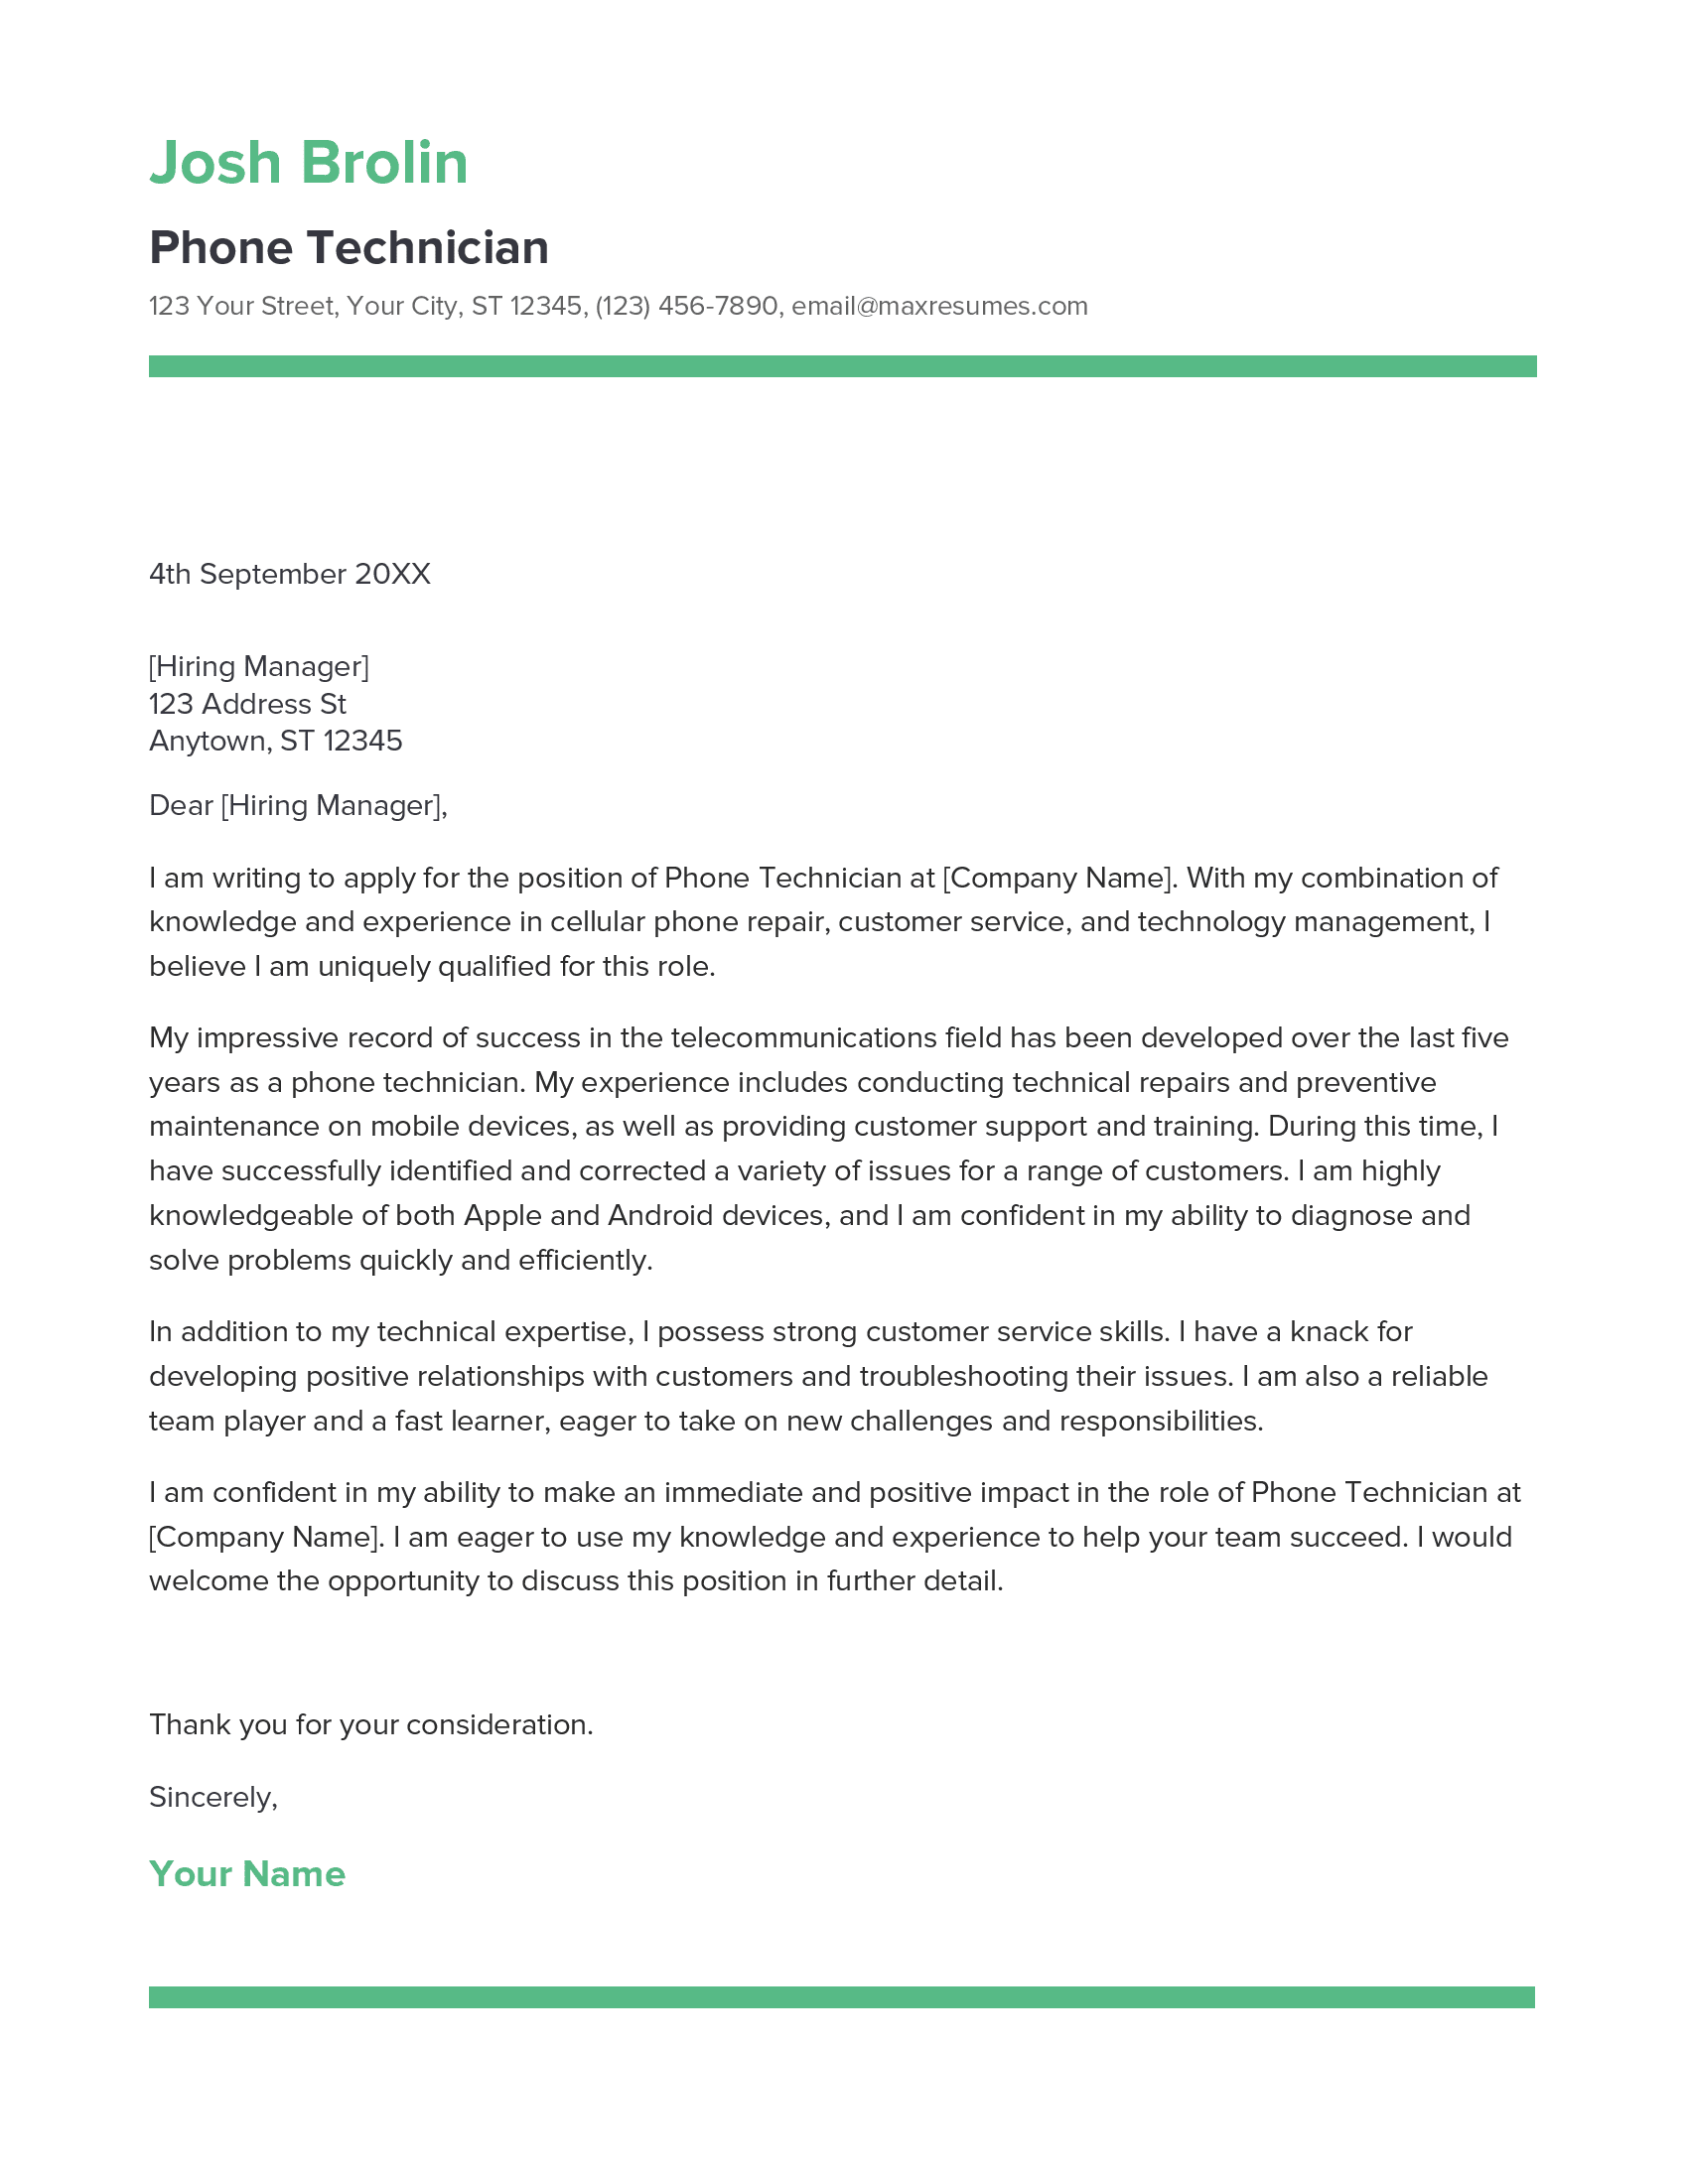 Phone Technician Cover Letter Example